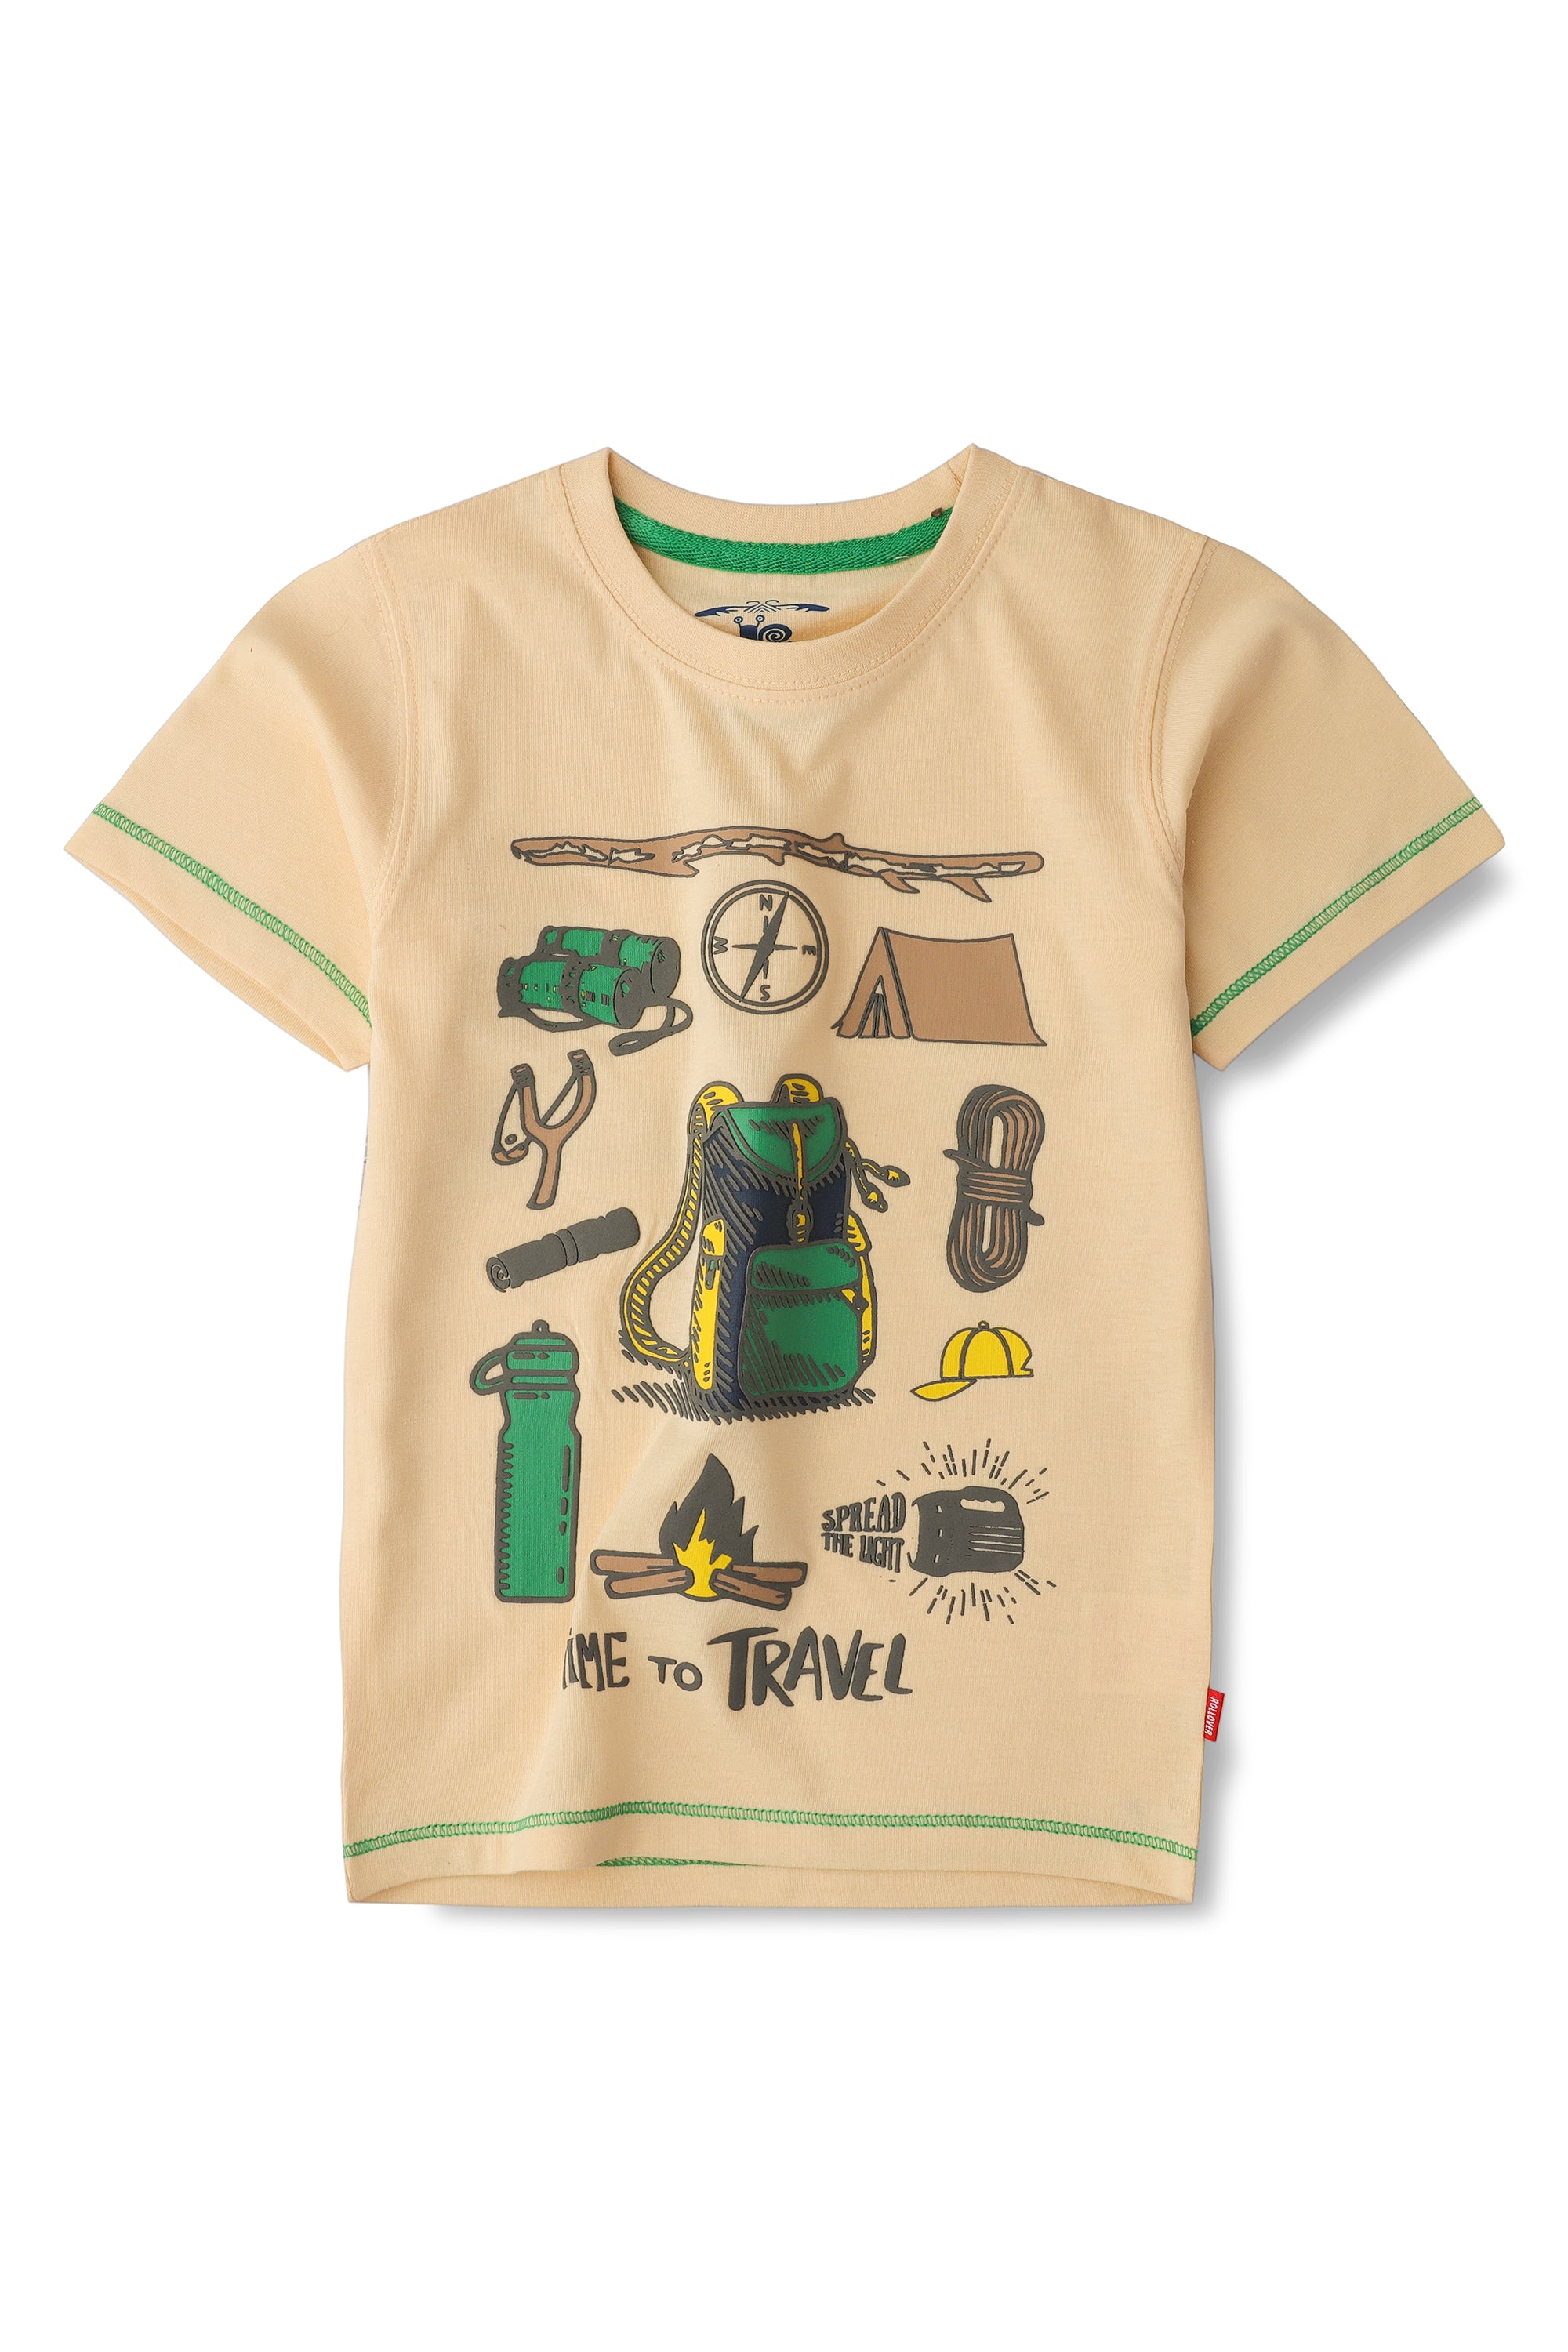 Time to Travel Tee